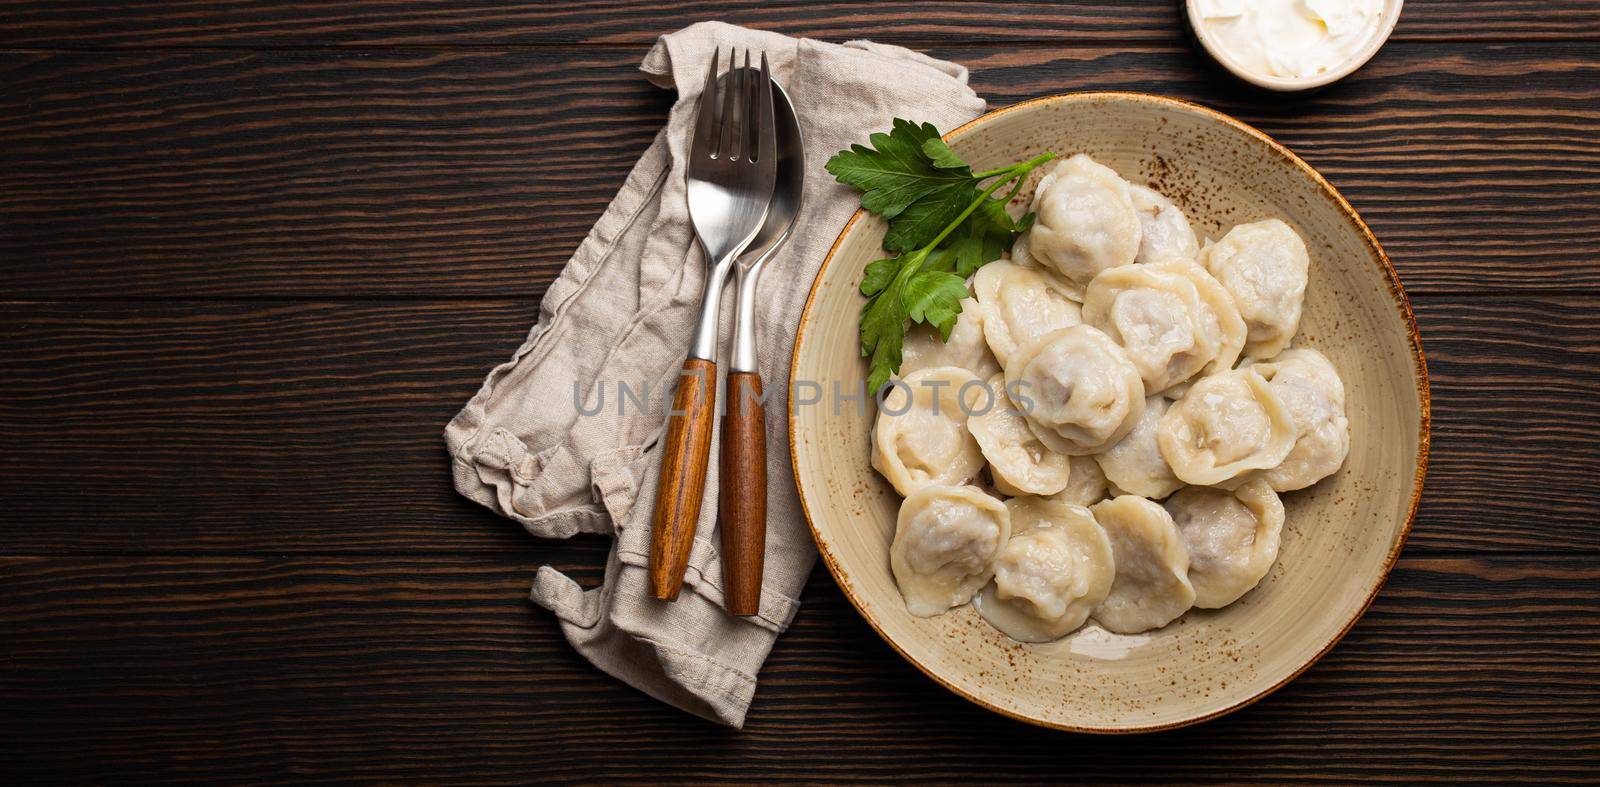 Pelmeni, traditional dish of Russian cuisine, boiled dumplings with minced meat by its_al_dente